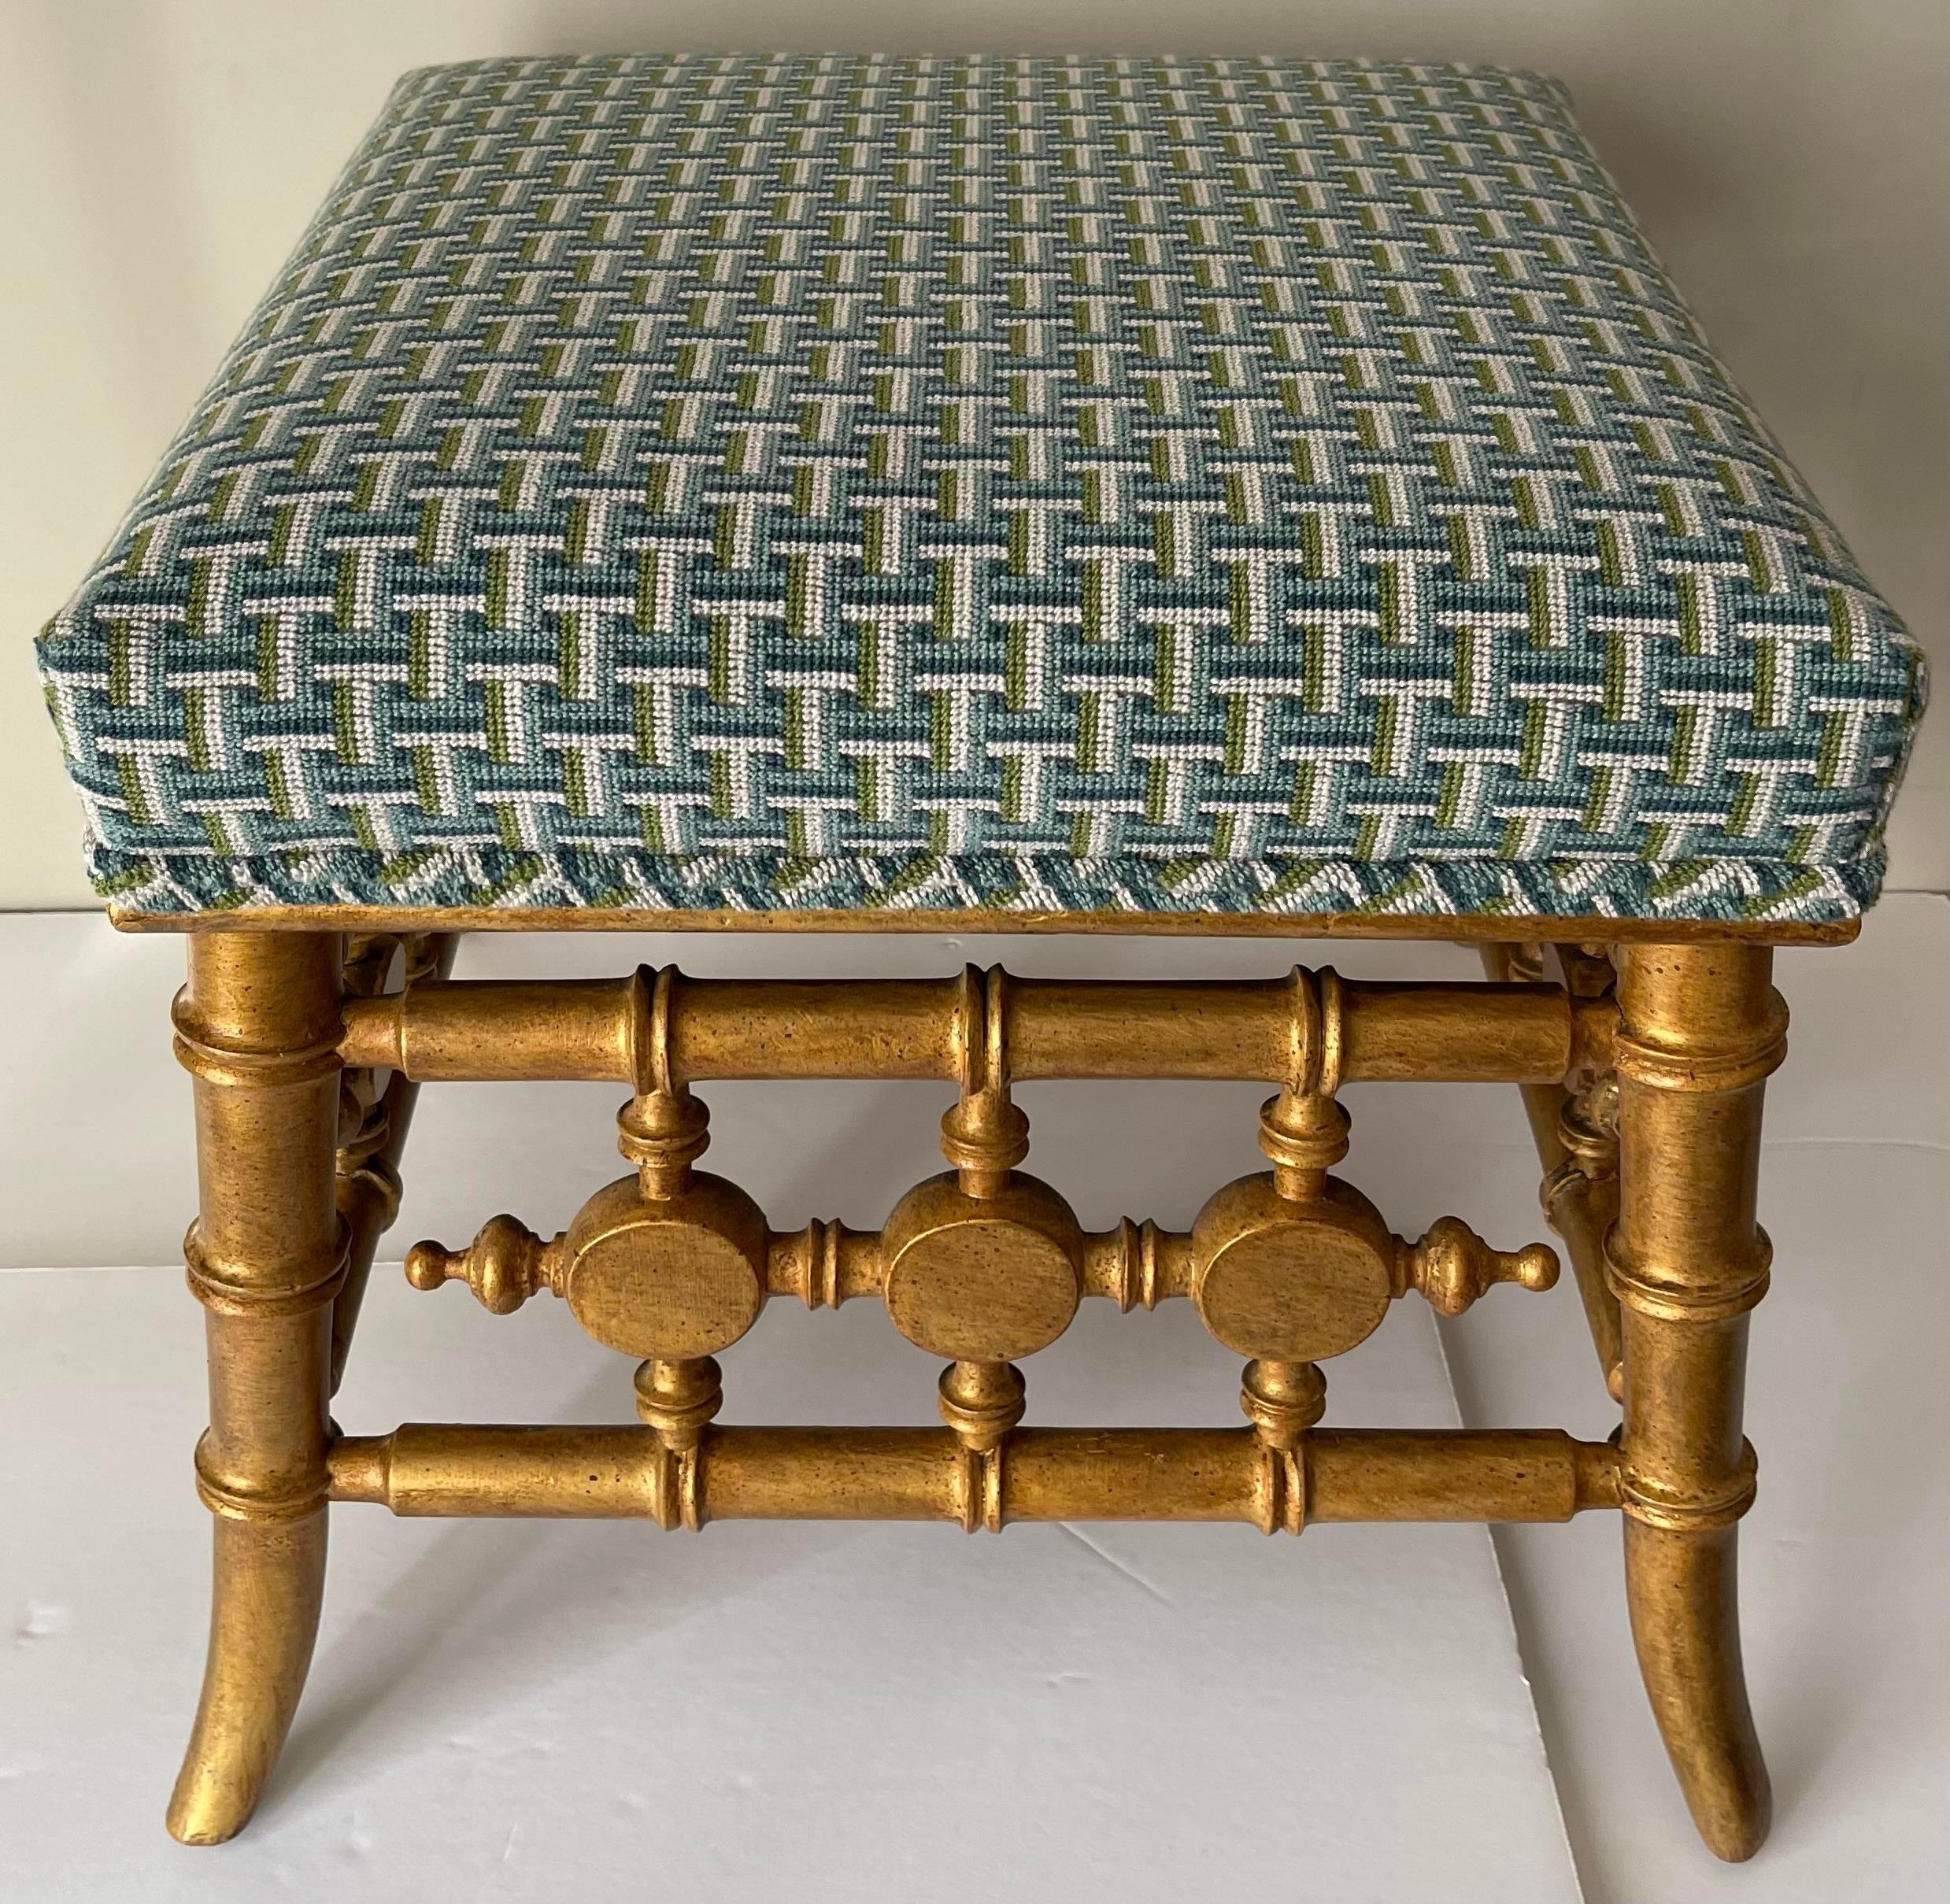 Victorian Antique Giltwood Faux Bamboo Stool Newly Upholstered For Sale